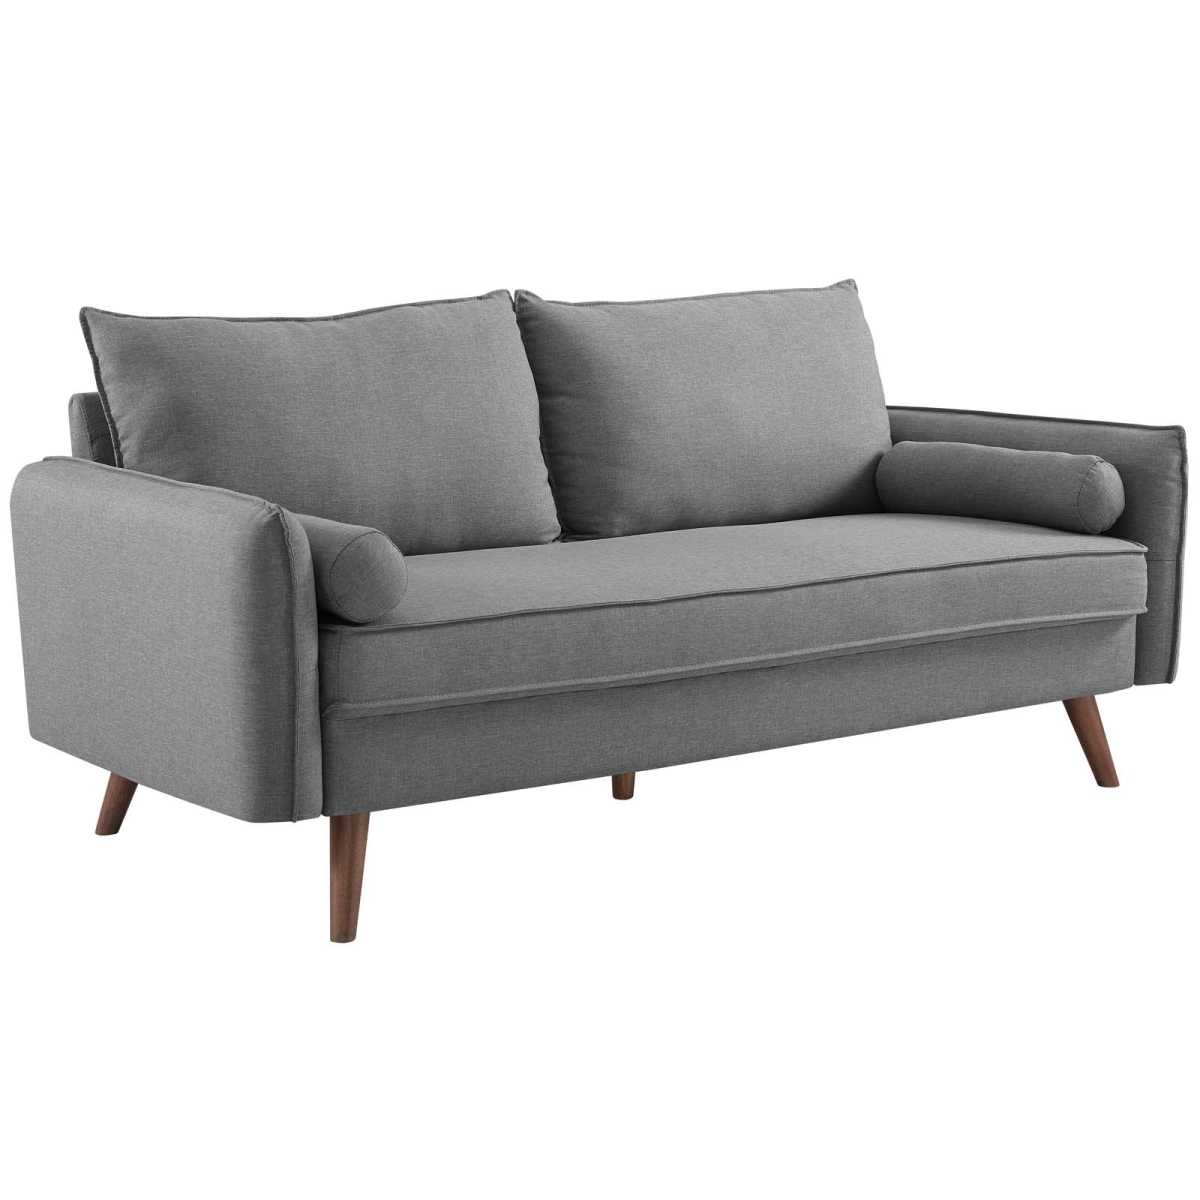 Eei-3092-lgr Revive Upholstered Fabric Sofa - Light Gray, 33.5 X 72 X 32.5 In.